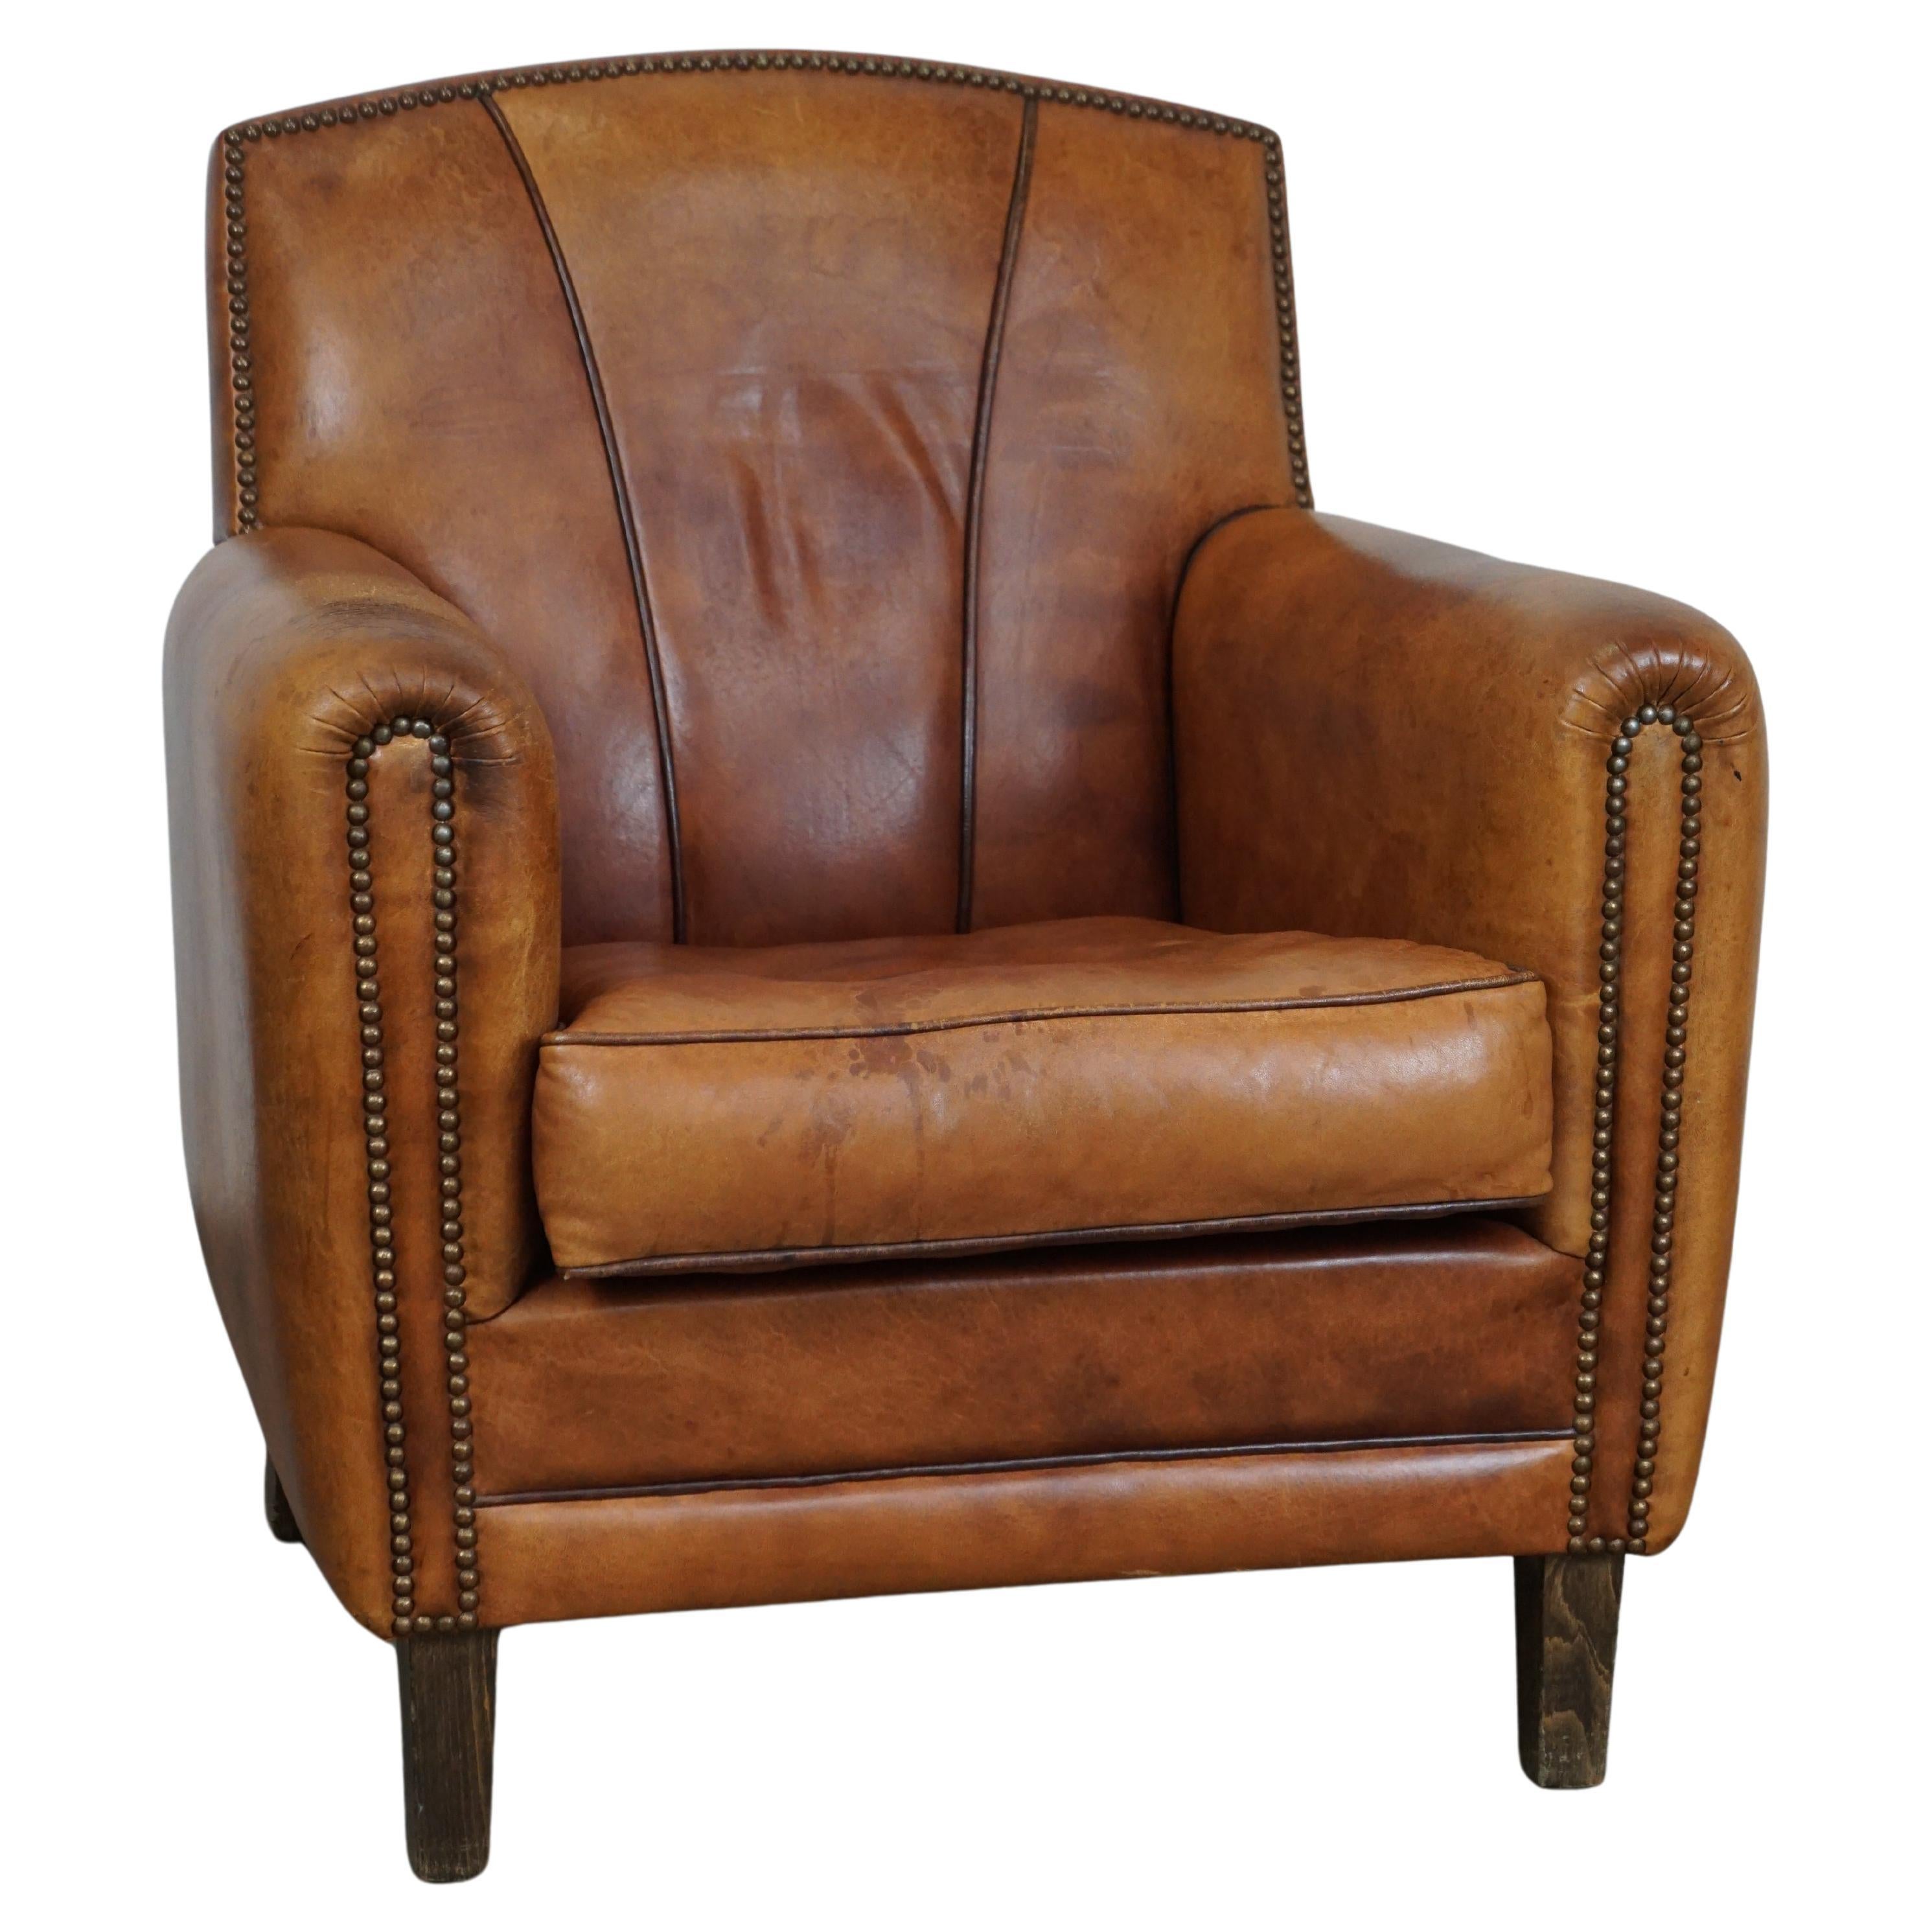 Sheep leather armchair with Art Deco design and a beautiful appearance